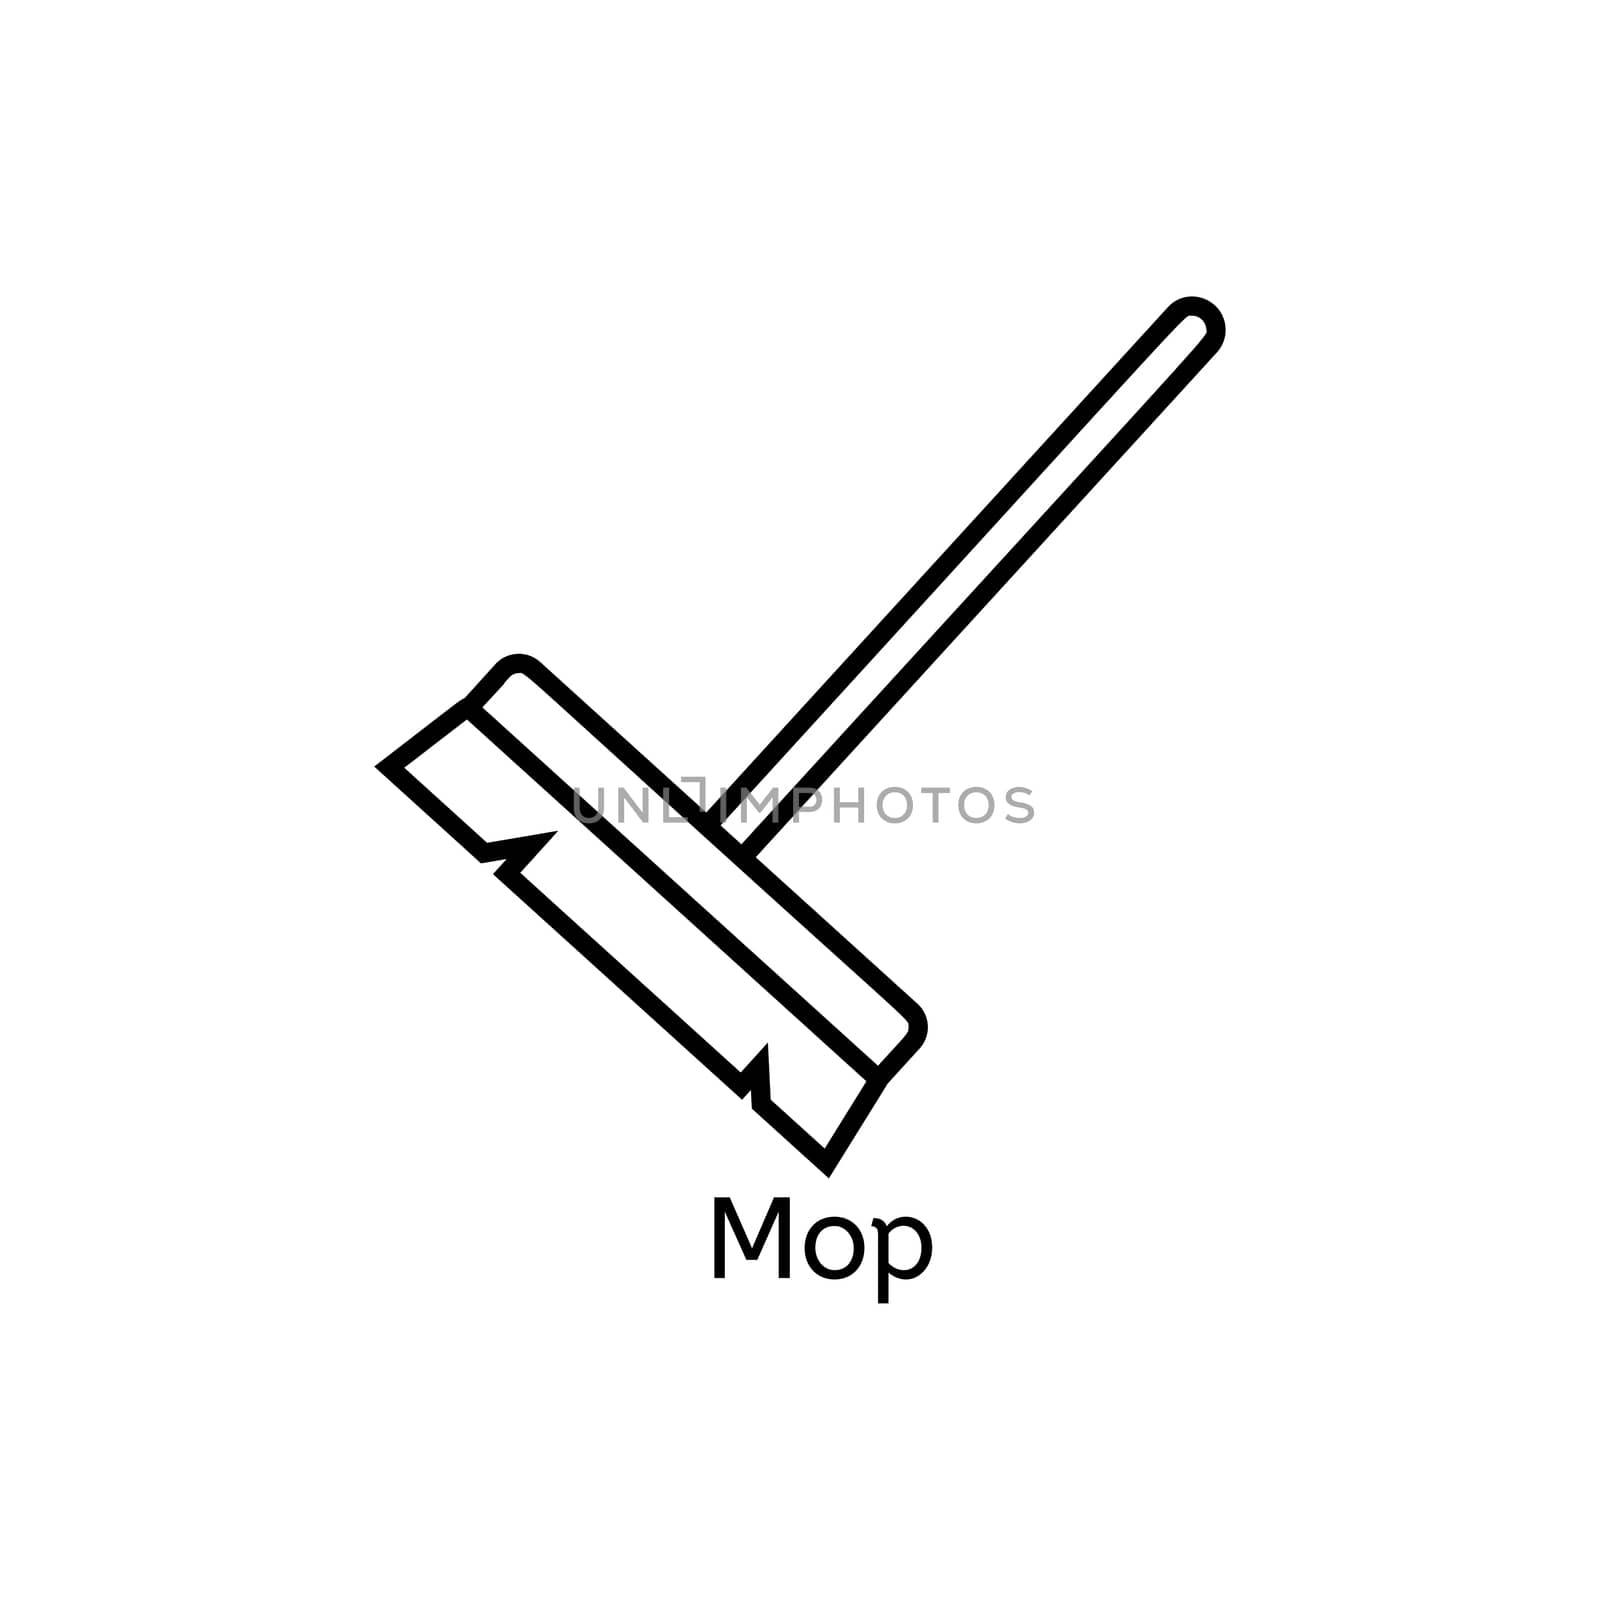 Mop simple line icon. Floor cleaning thin linear signs. Cleaning simple concept for websites, infographic, mobile app.